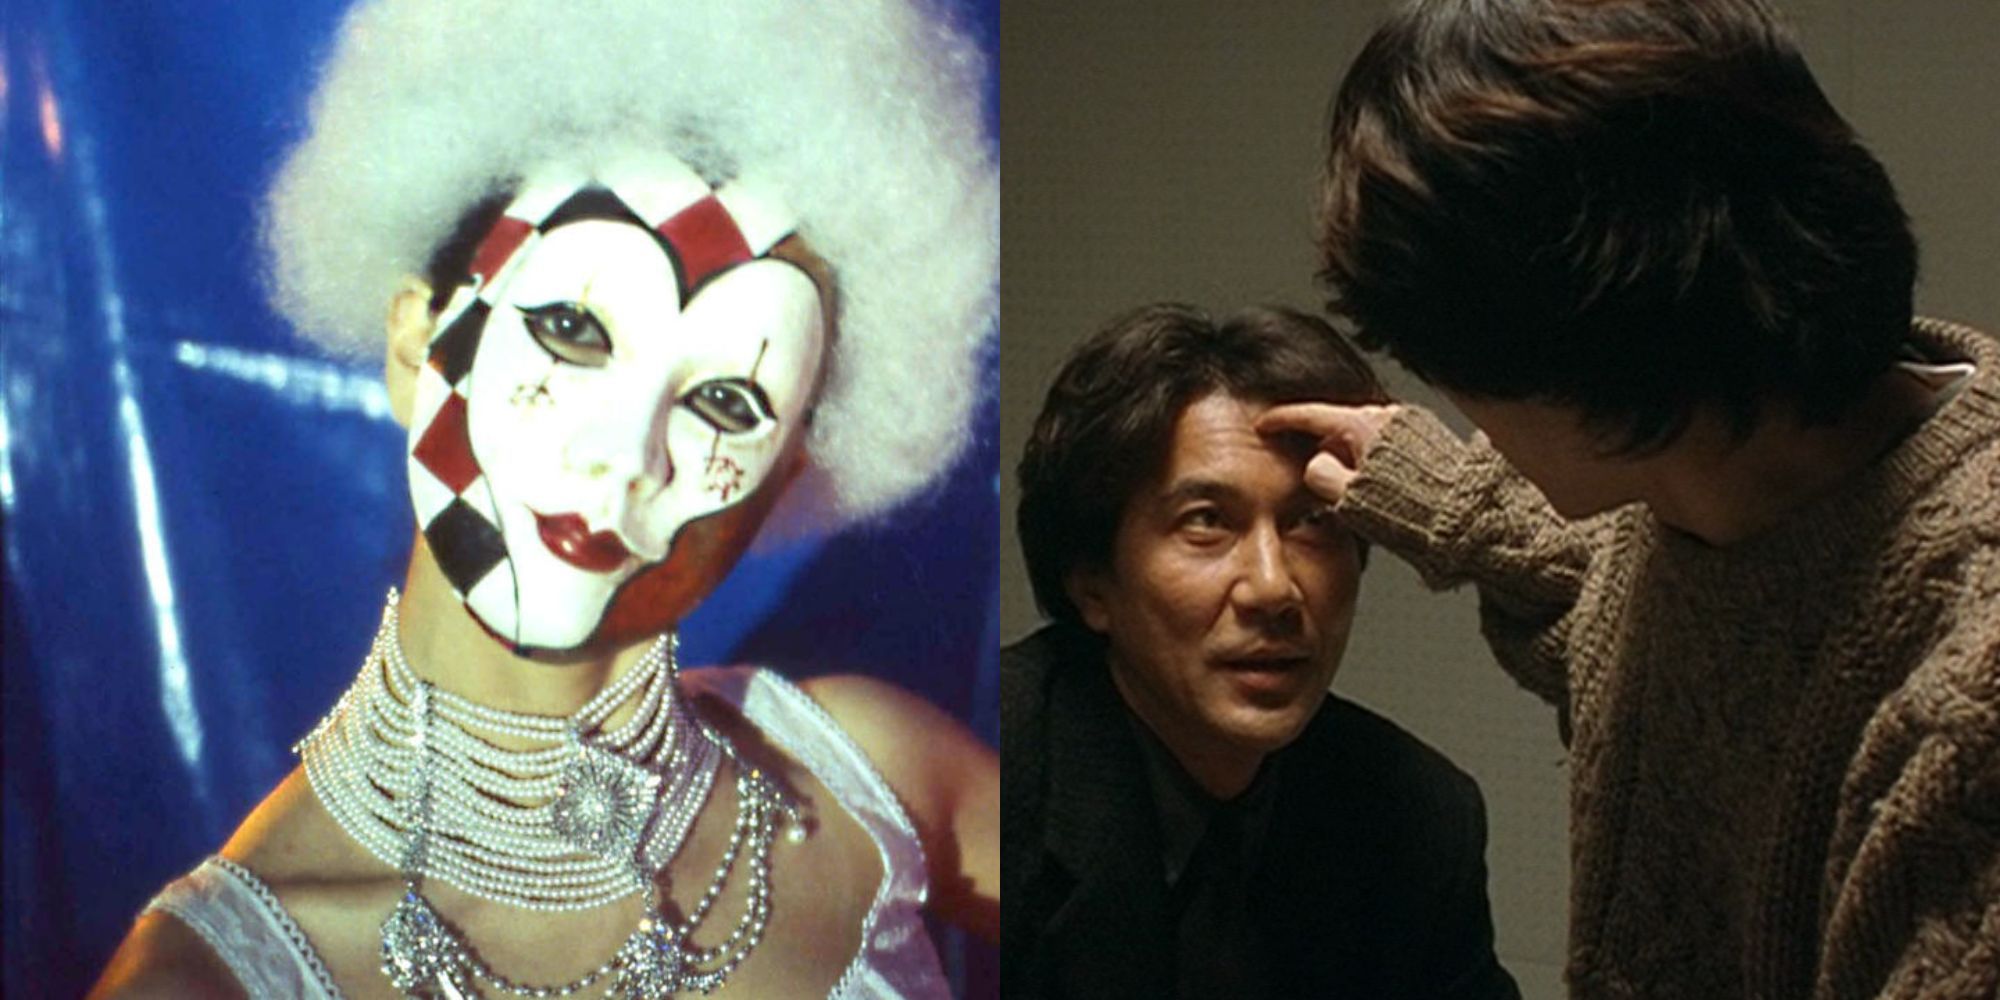 Still images of Strange Circus (2005) on the left and Cure (1997) on the right